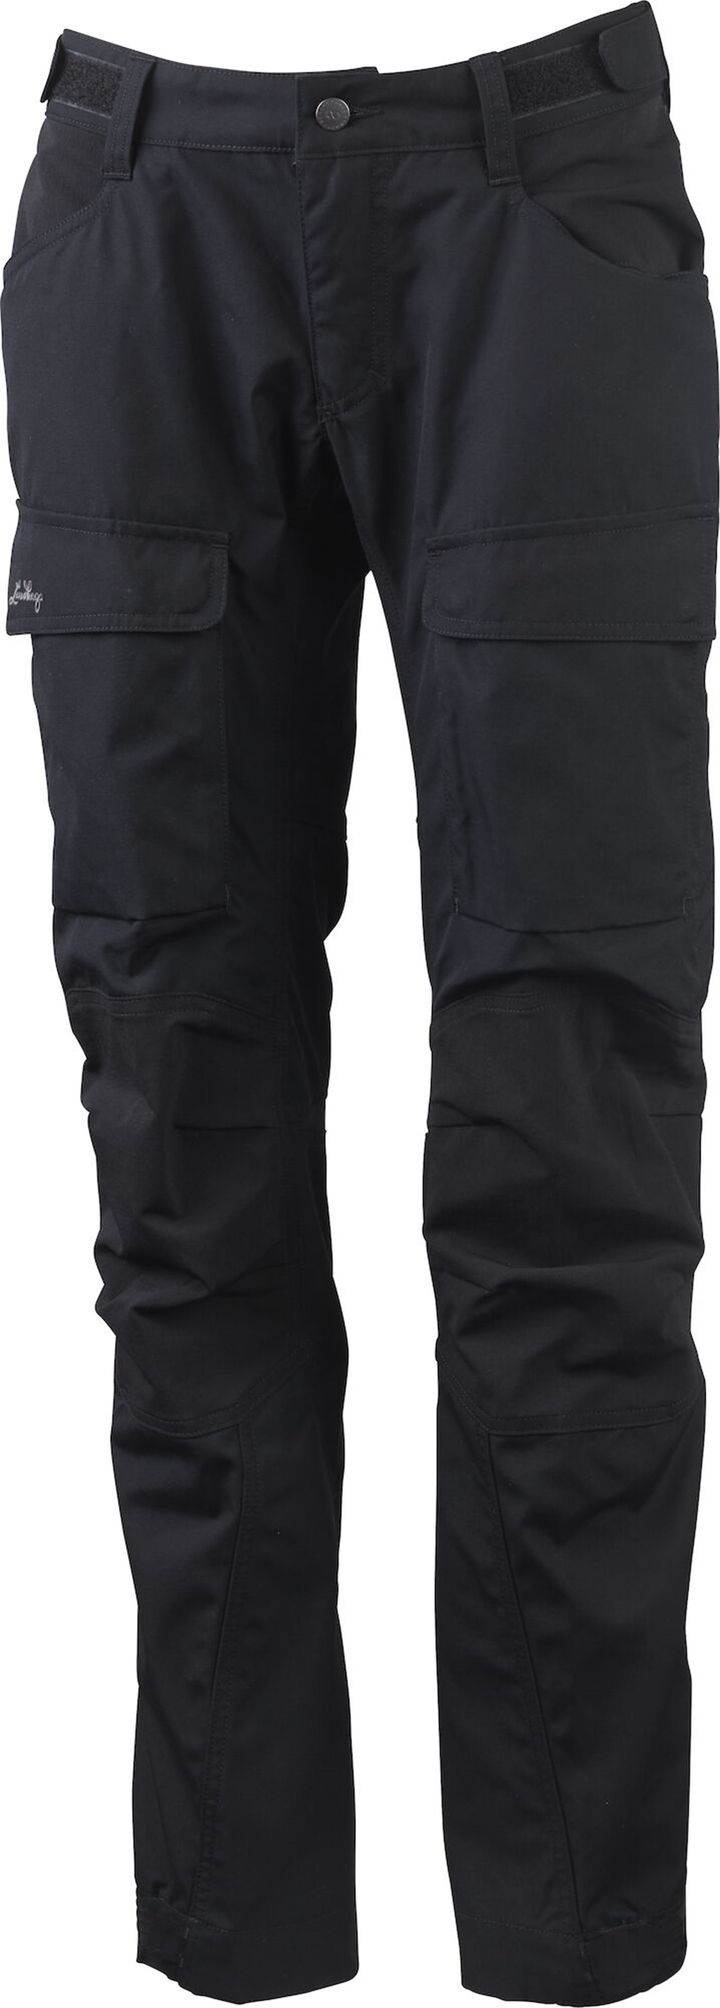 Lundhags Women's Authentic II Pant Black Lundhags